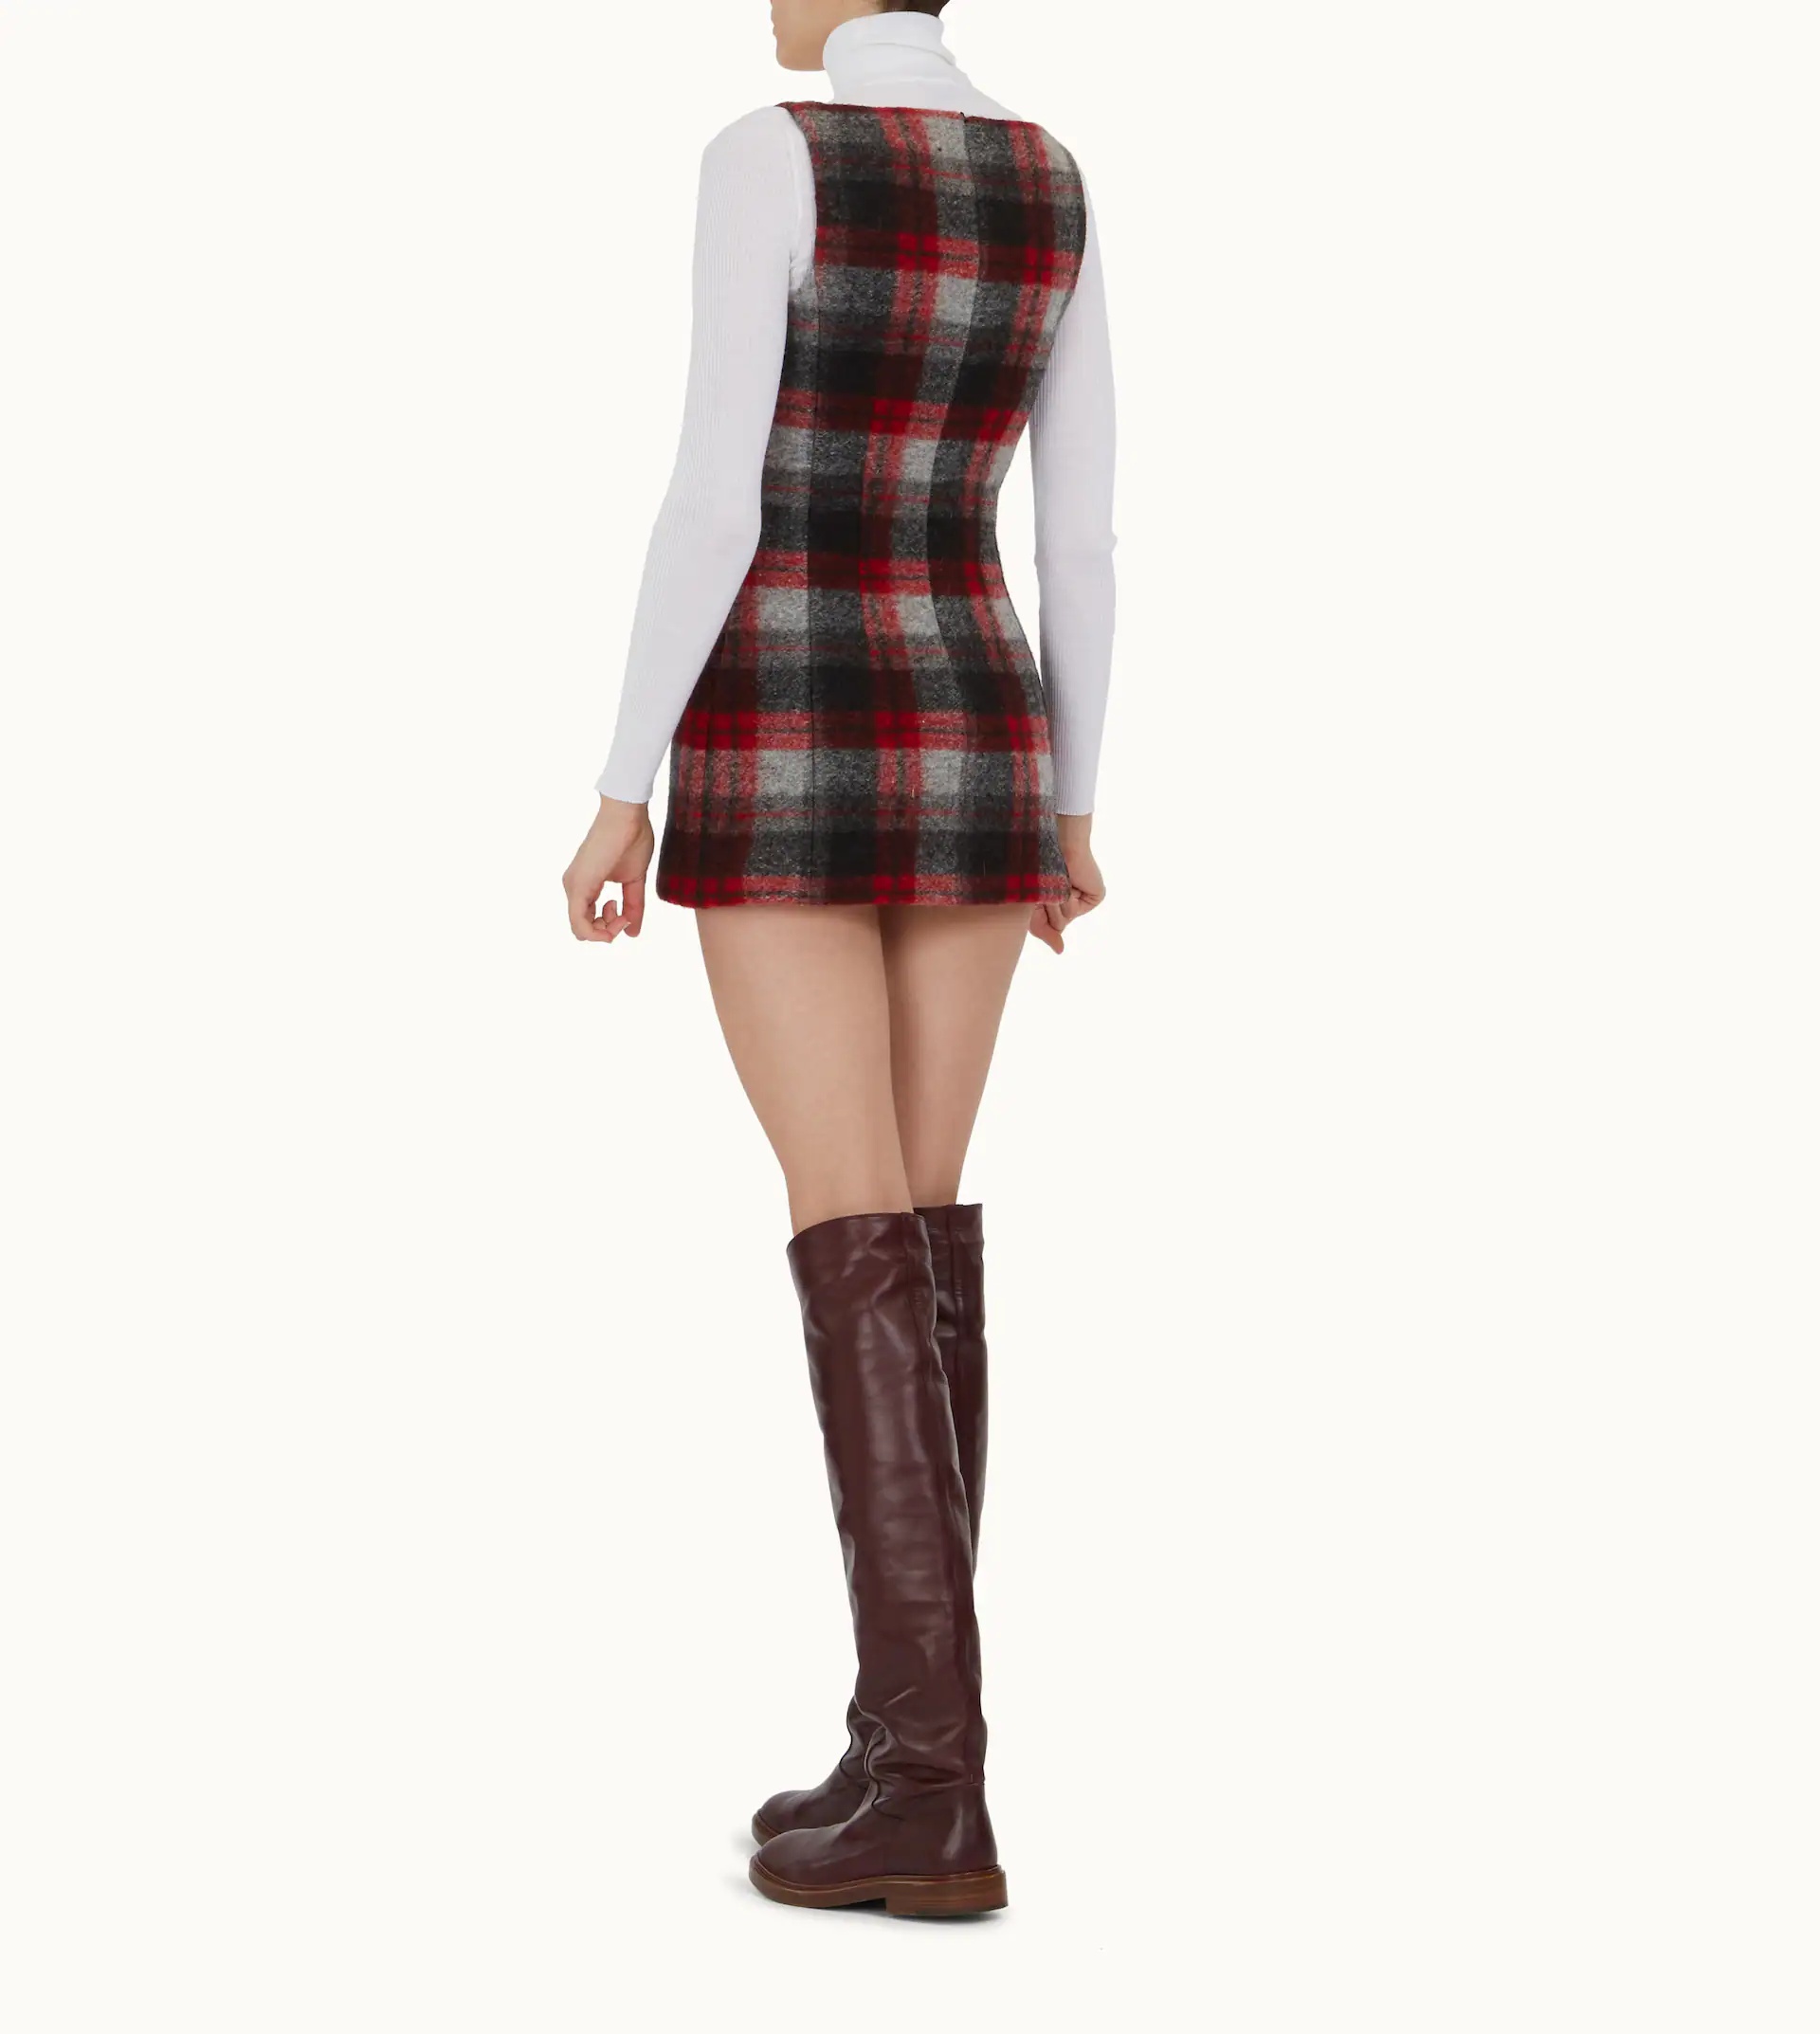 DRESS IN MIXED WOOL - RED, GREY, BLACK - 3